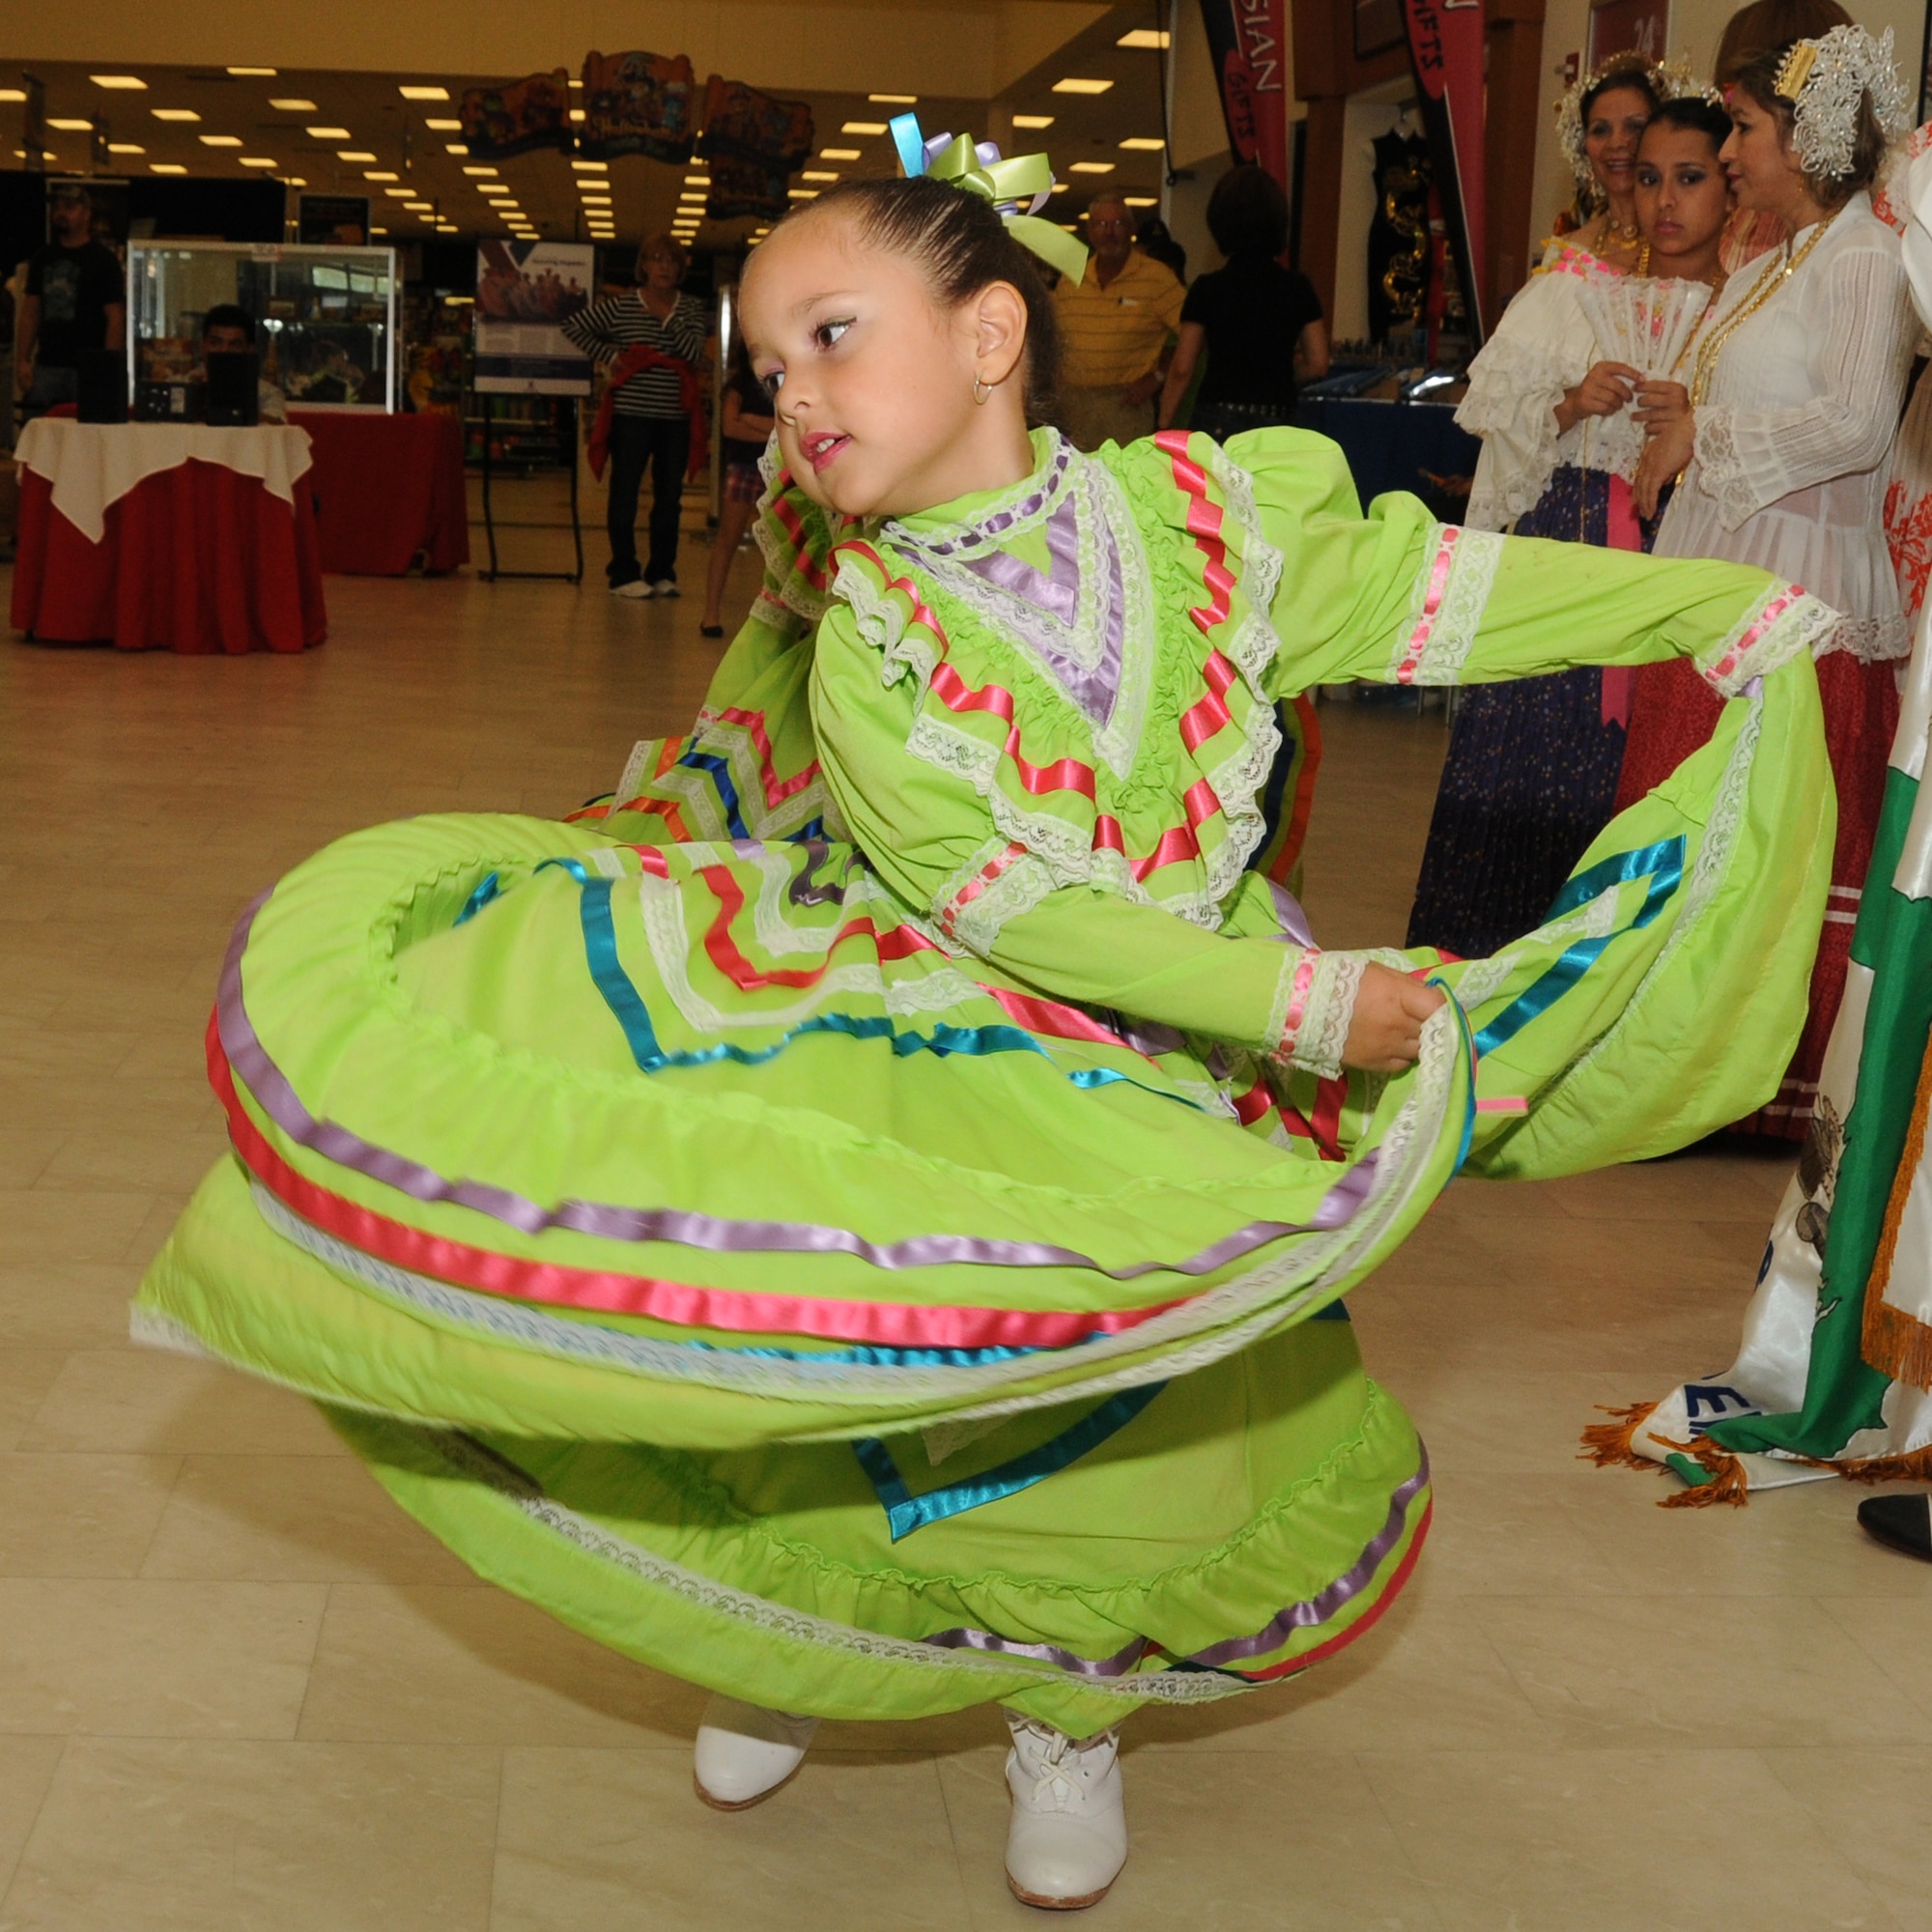 Five-year-old Brianna Rinza, daughter of Norma and Hector Rinza of Gautier, performs a traditional Mexican dance with Vicentenario de Mexico group Oct. 8 during the Hispanic Heritage Month celebration at the main exchange, Keesler Air Force Base, Miss. The Panama Without Borders Folkloric Dance Group from Biloxi headlined the program and performed 12 dances attired in traditional Panamanian costumes.  (U.S. Air Force photo by Kemberly Groue)